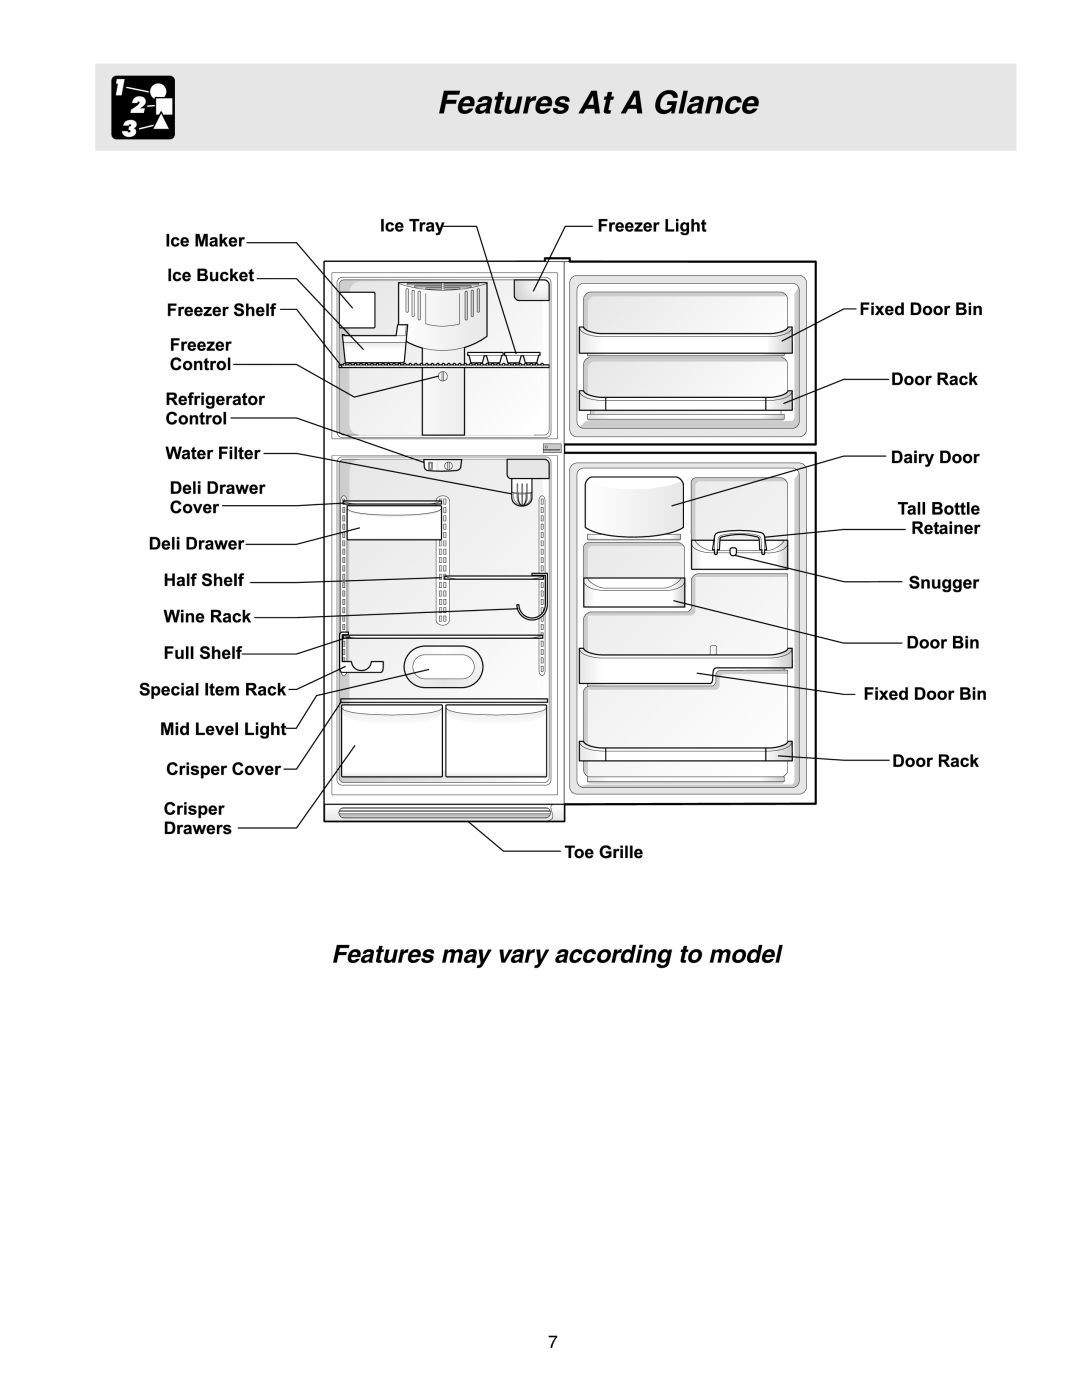 Frigidaire 241567601 manual Features At A Glance, Features may vary according to model 